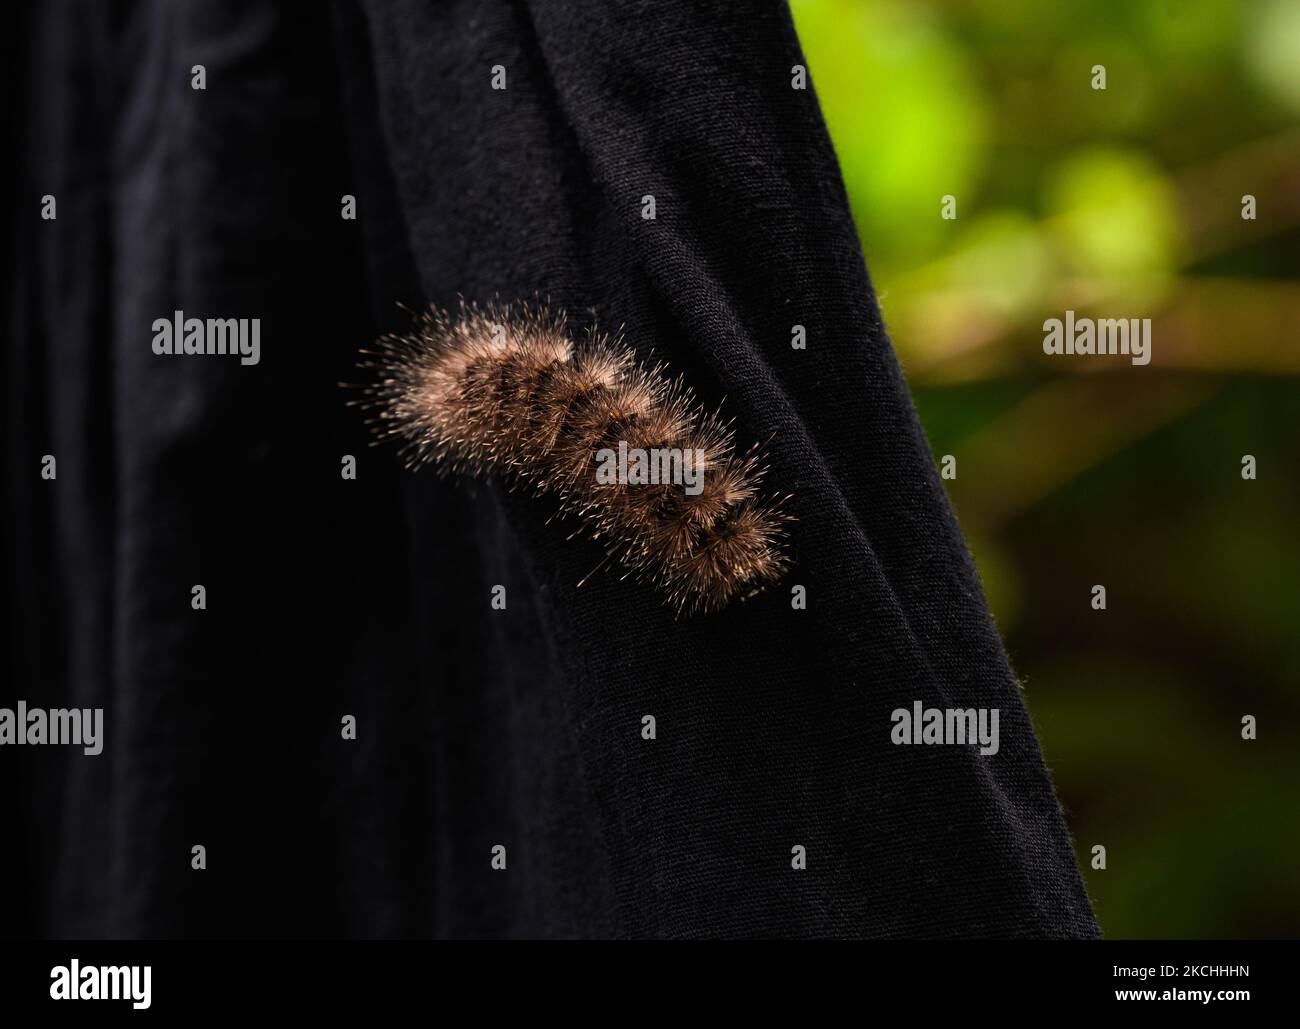 Tiger moth (Arctiinae) fuzzy hairy caterpillar is on the garment at Tehatta, West Bengal, India on 21 July 2021. The caterpillars' defense system at the tip of each defensive hair is a microscopic barb with a weakened ring at the base, allowing the barb to easily break off in the skin of any animal that grabs onto them can be a cause of Lepidopterism (a disease caused by the urticating scales and toxic fluids of adult moths, butterflies or its caterpillars). (Photo by Soumyabrata Roy/NurPhoto) Stock Photo